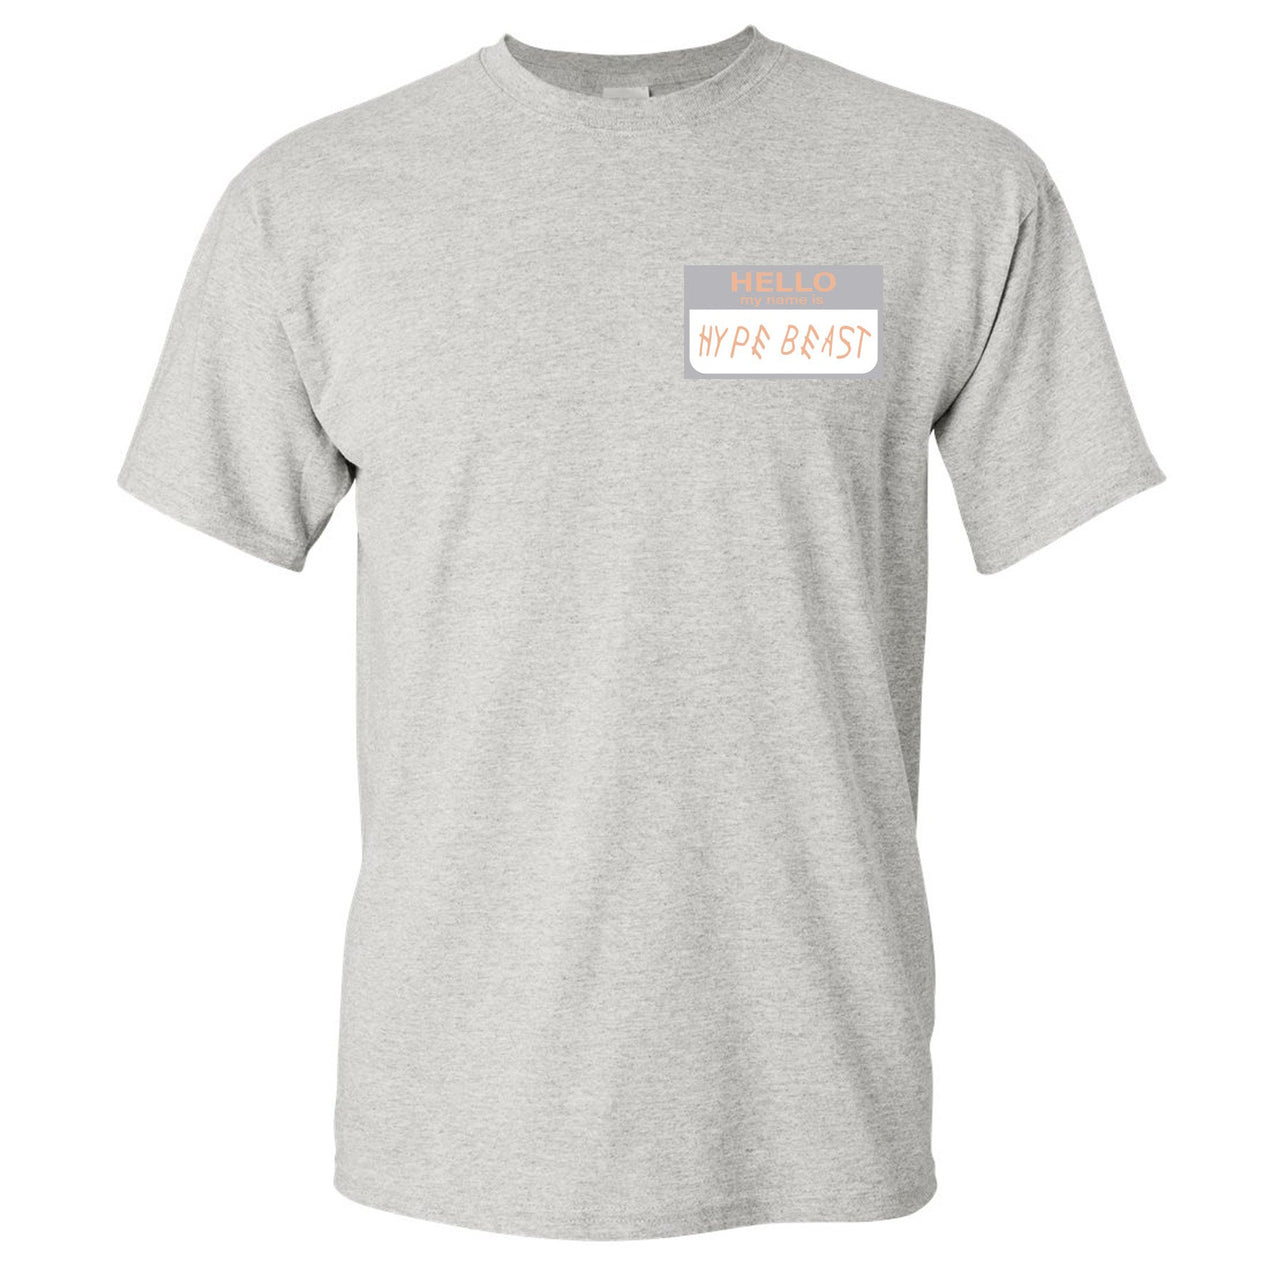 True Form v2 350s T Shirt | Hello My Name Is Hype Beast Woe, Heathered Sports Gray